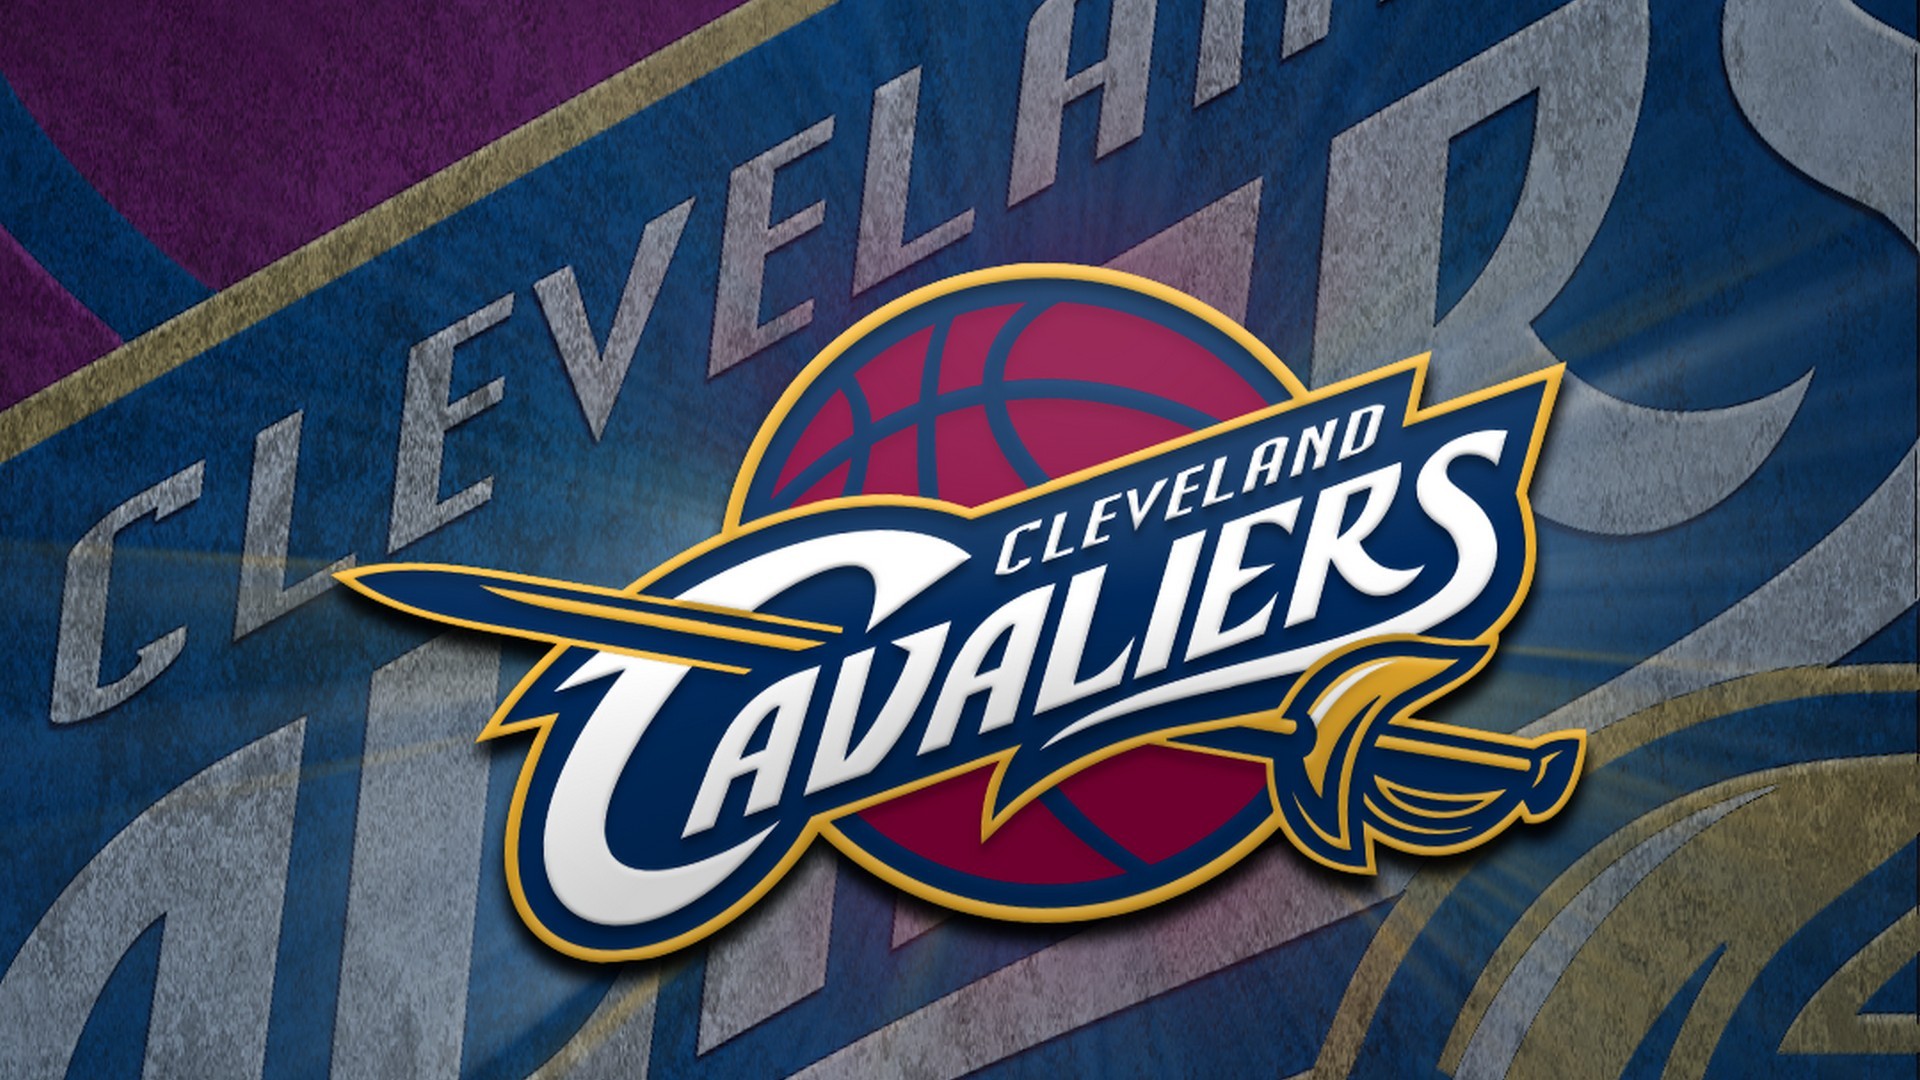 Cleveland Cavaliers Wallpaper For Mac Backgrounds 1920x1080